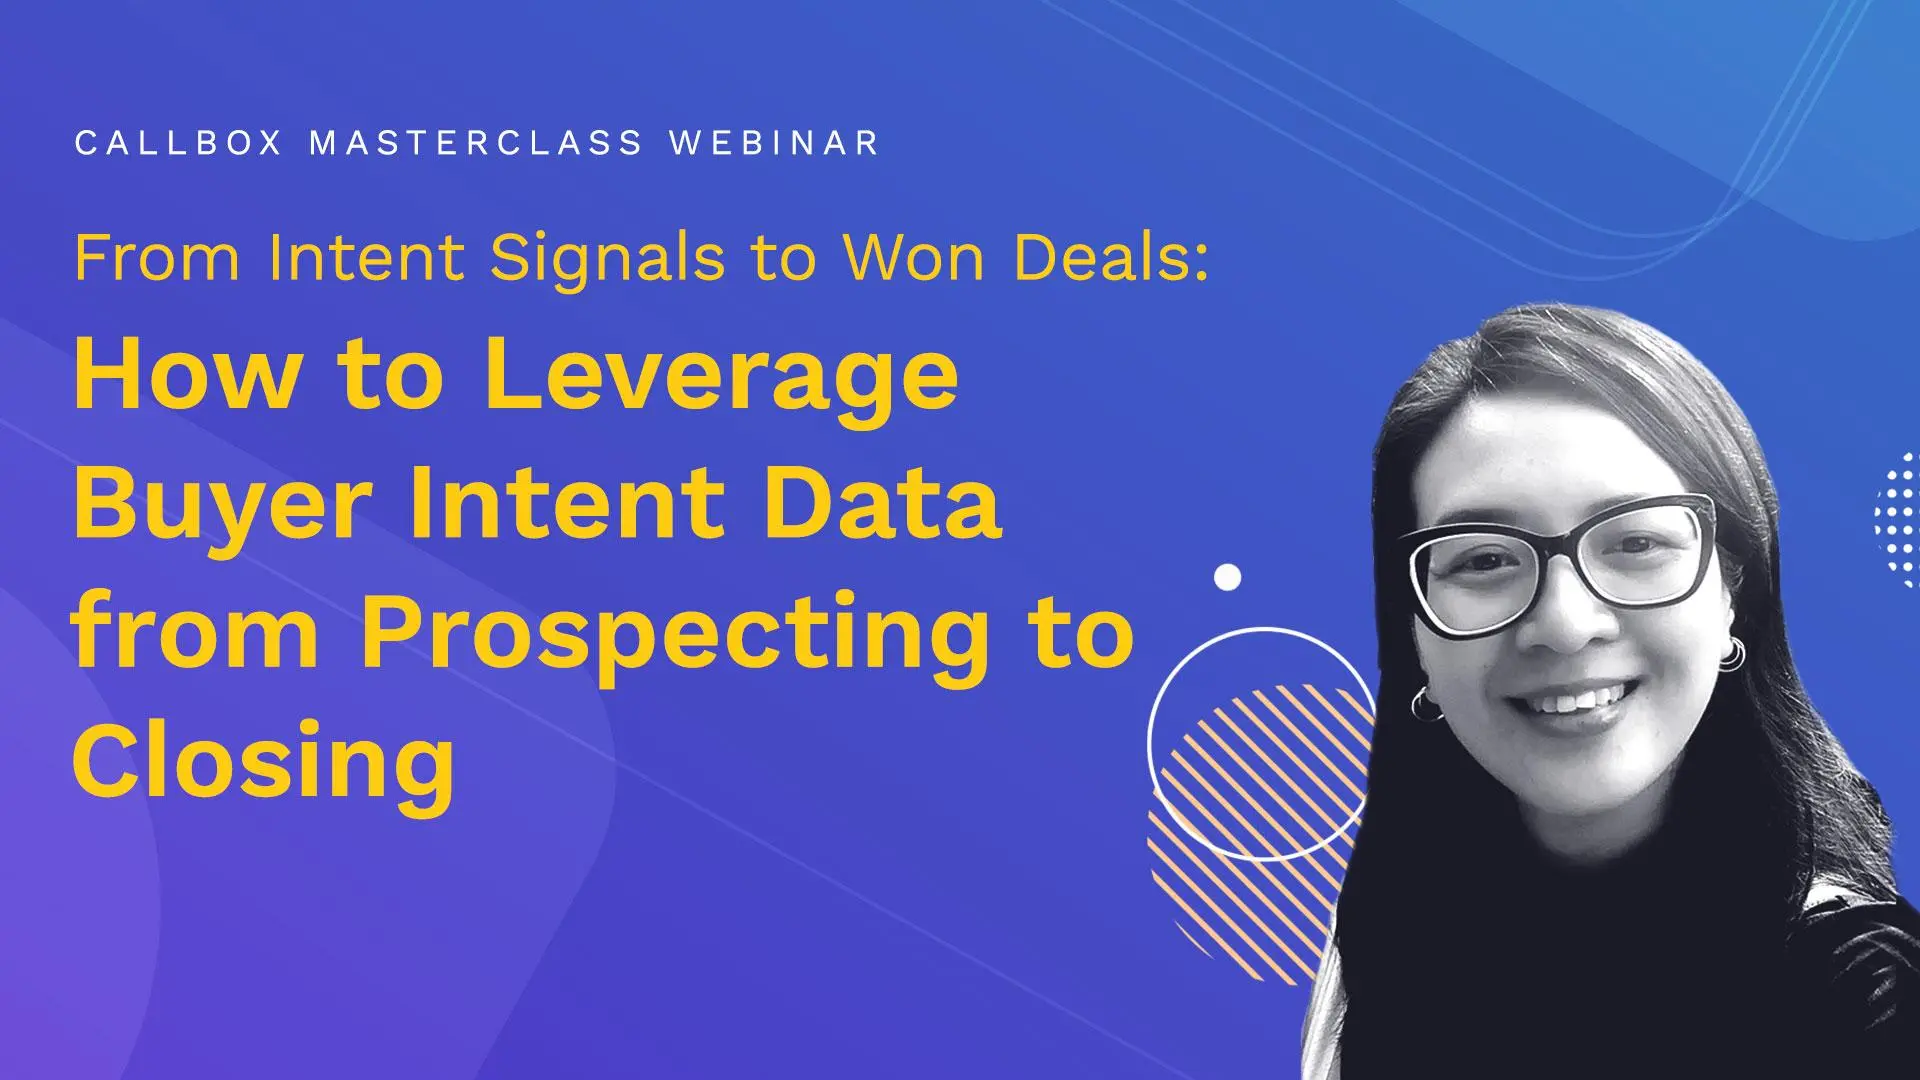 From Intent Signals to Won Deals: How to Leverage Buyer Intent Data from Prospecting to Closing